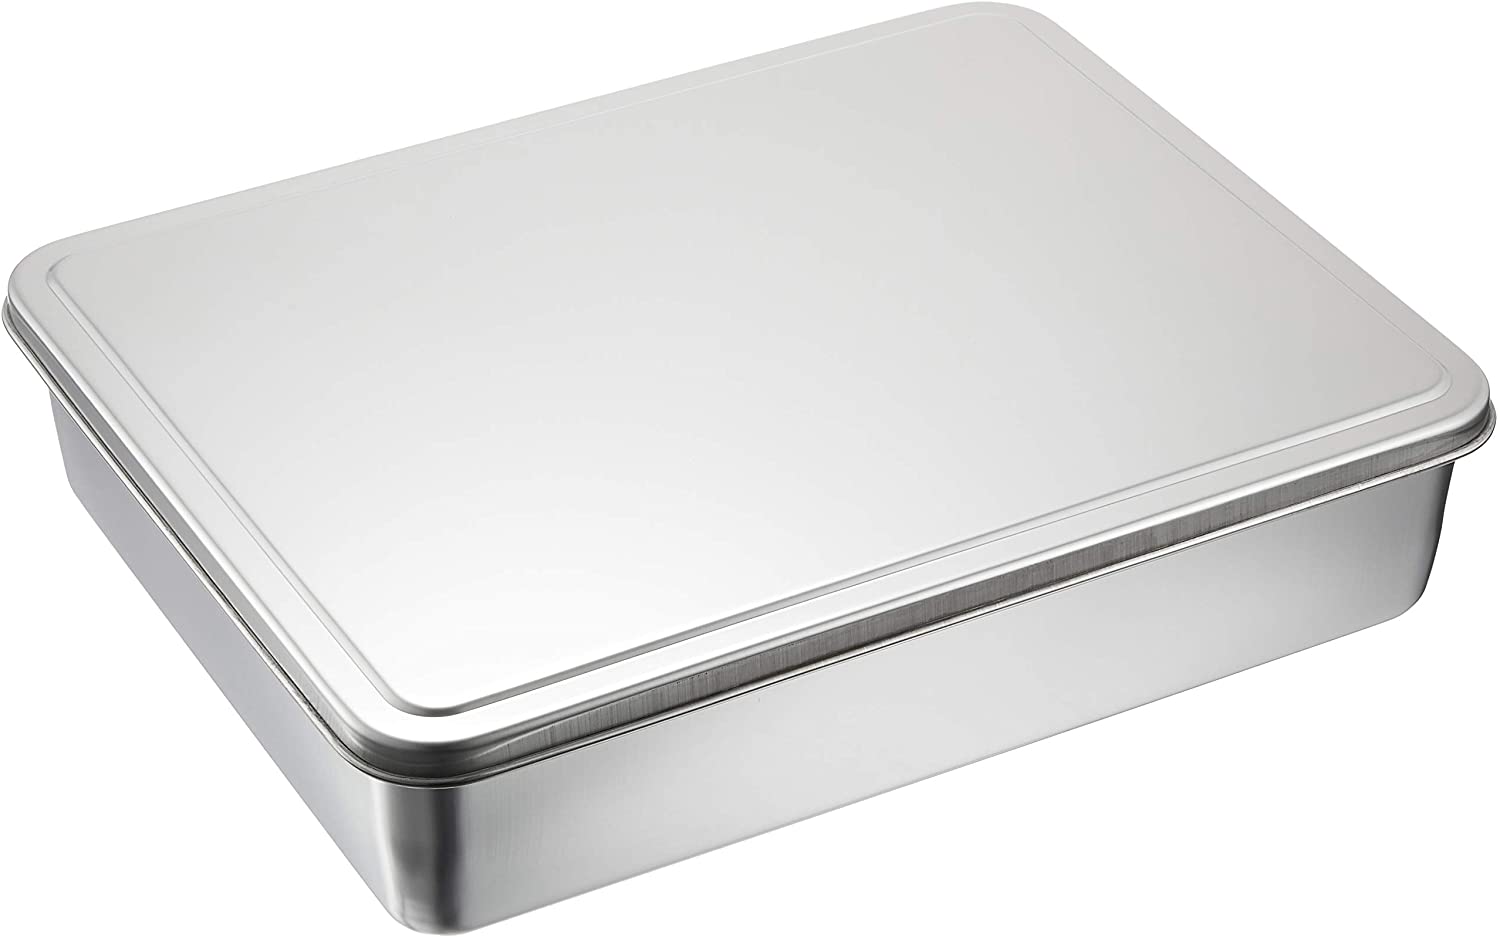 stainless yakumi pan/seasoning container w/4 compartments 